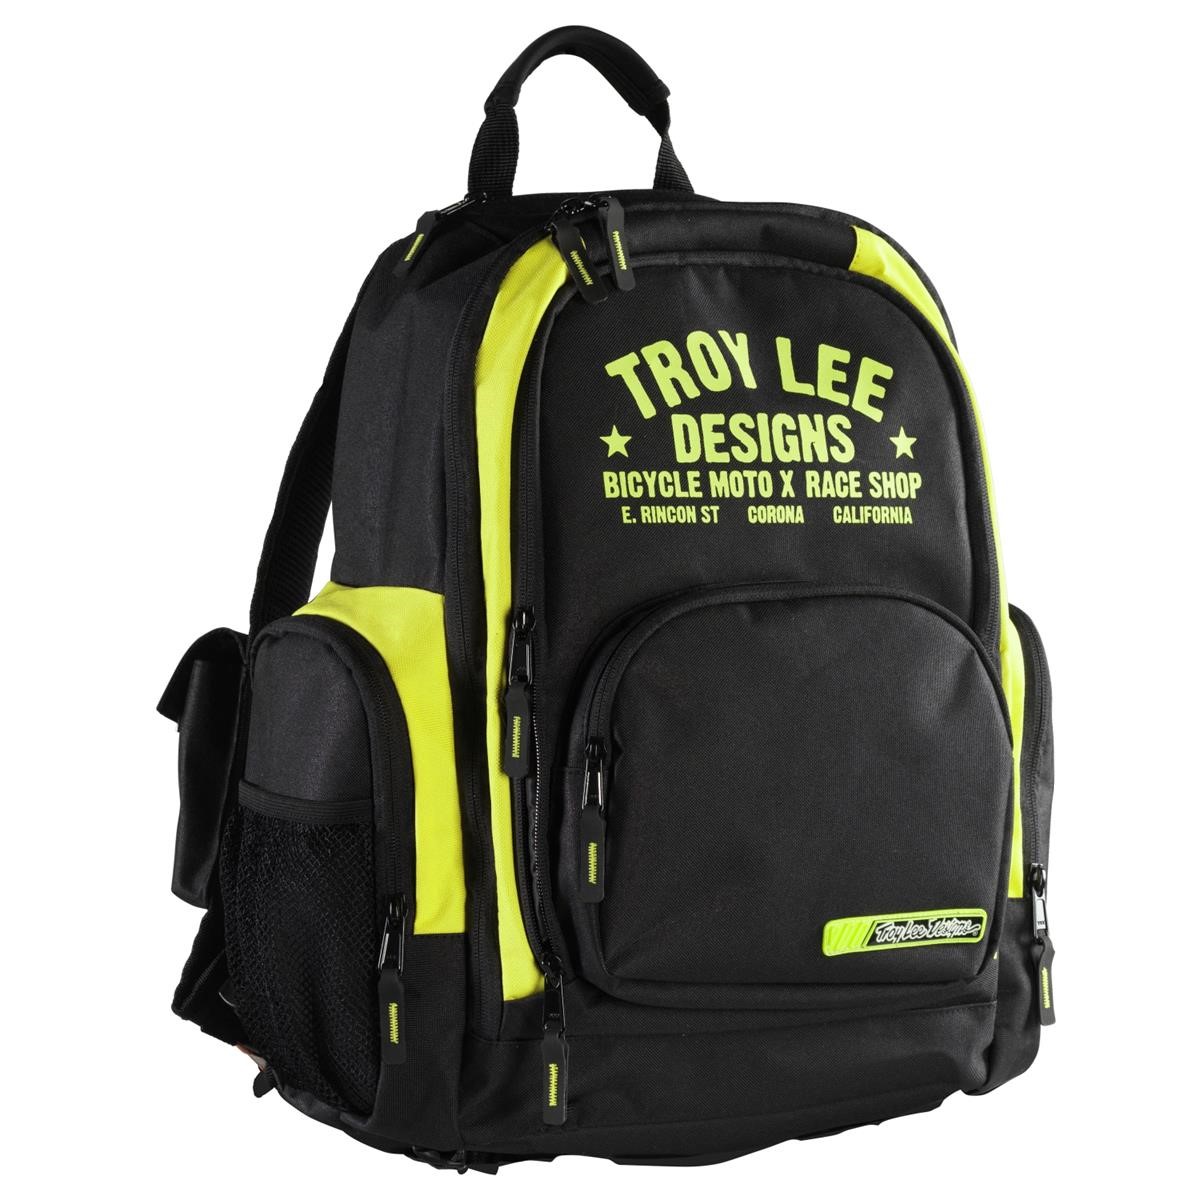 Troy Lee Designs Backpack Basic Race Shop Yellow